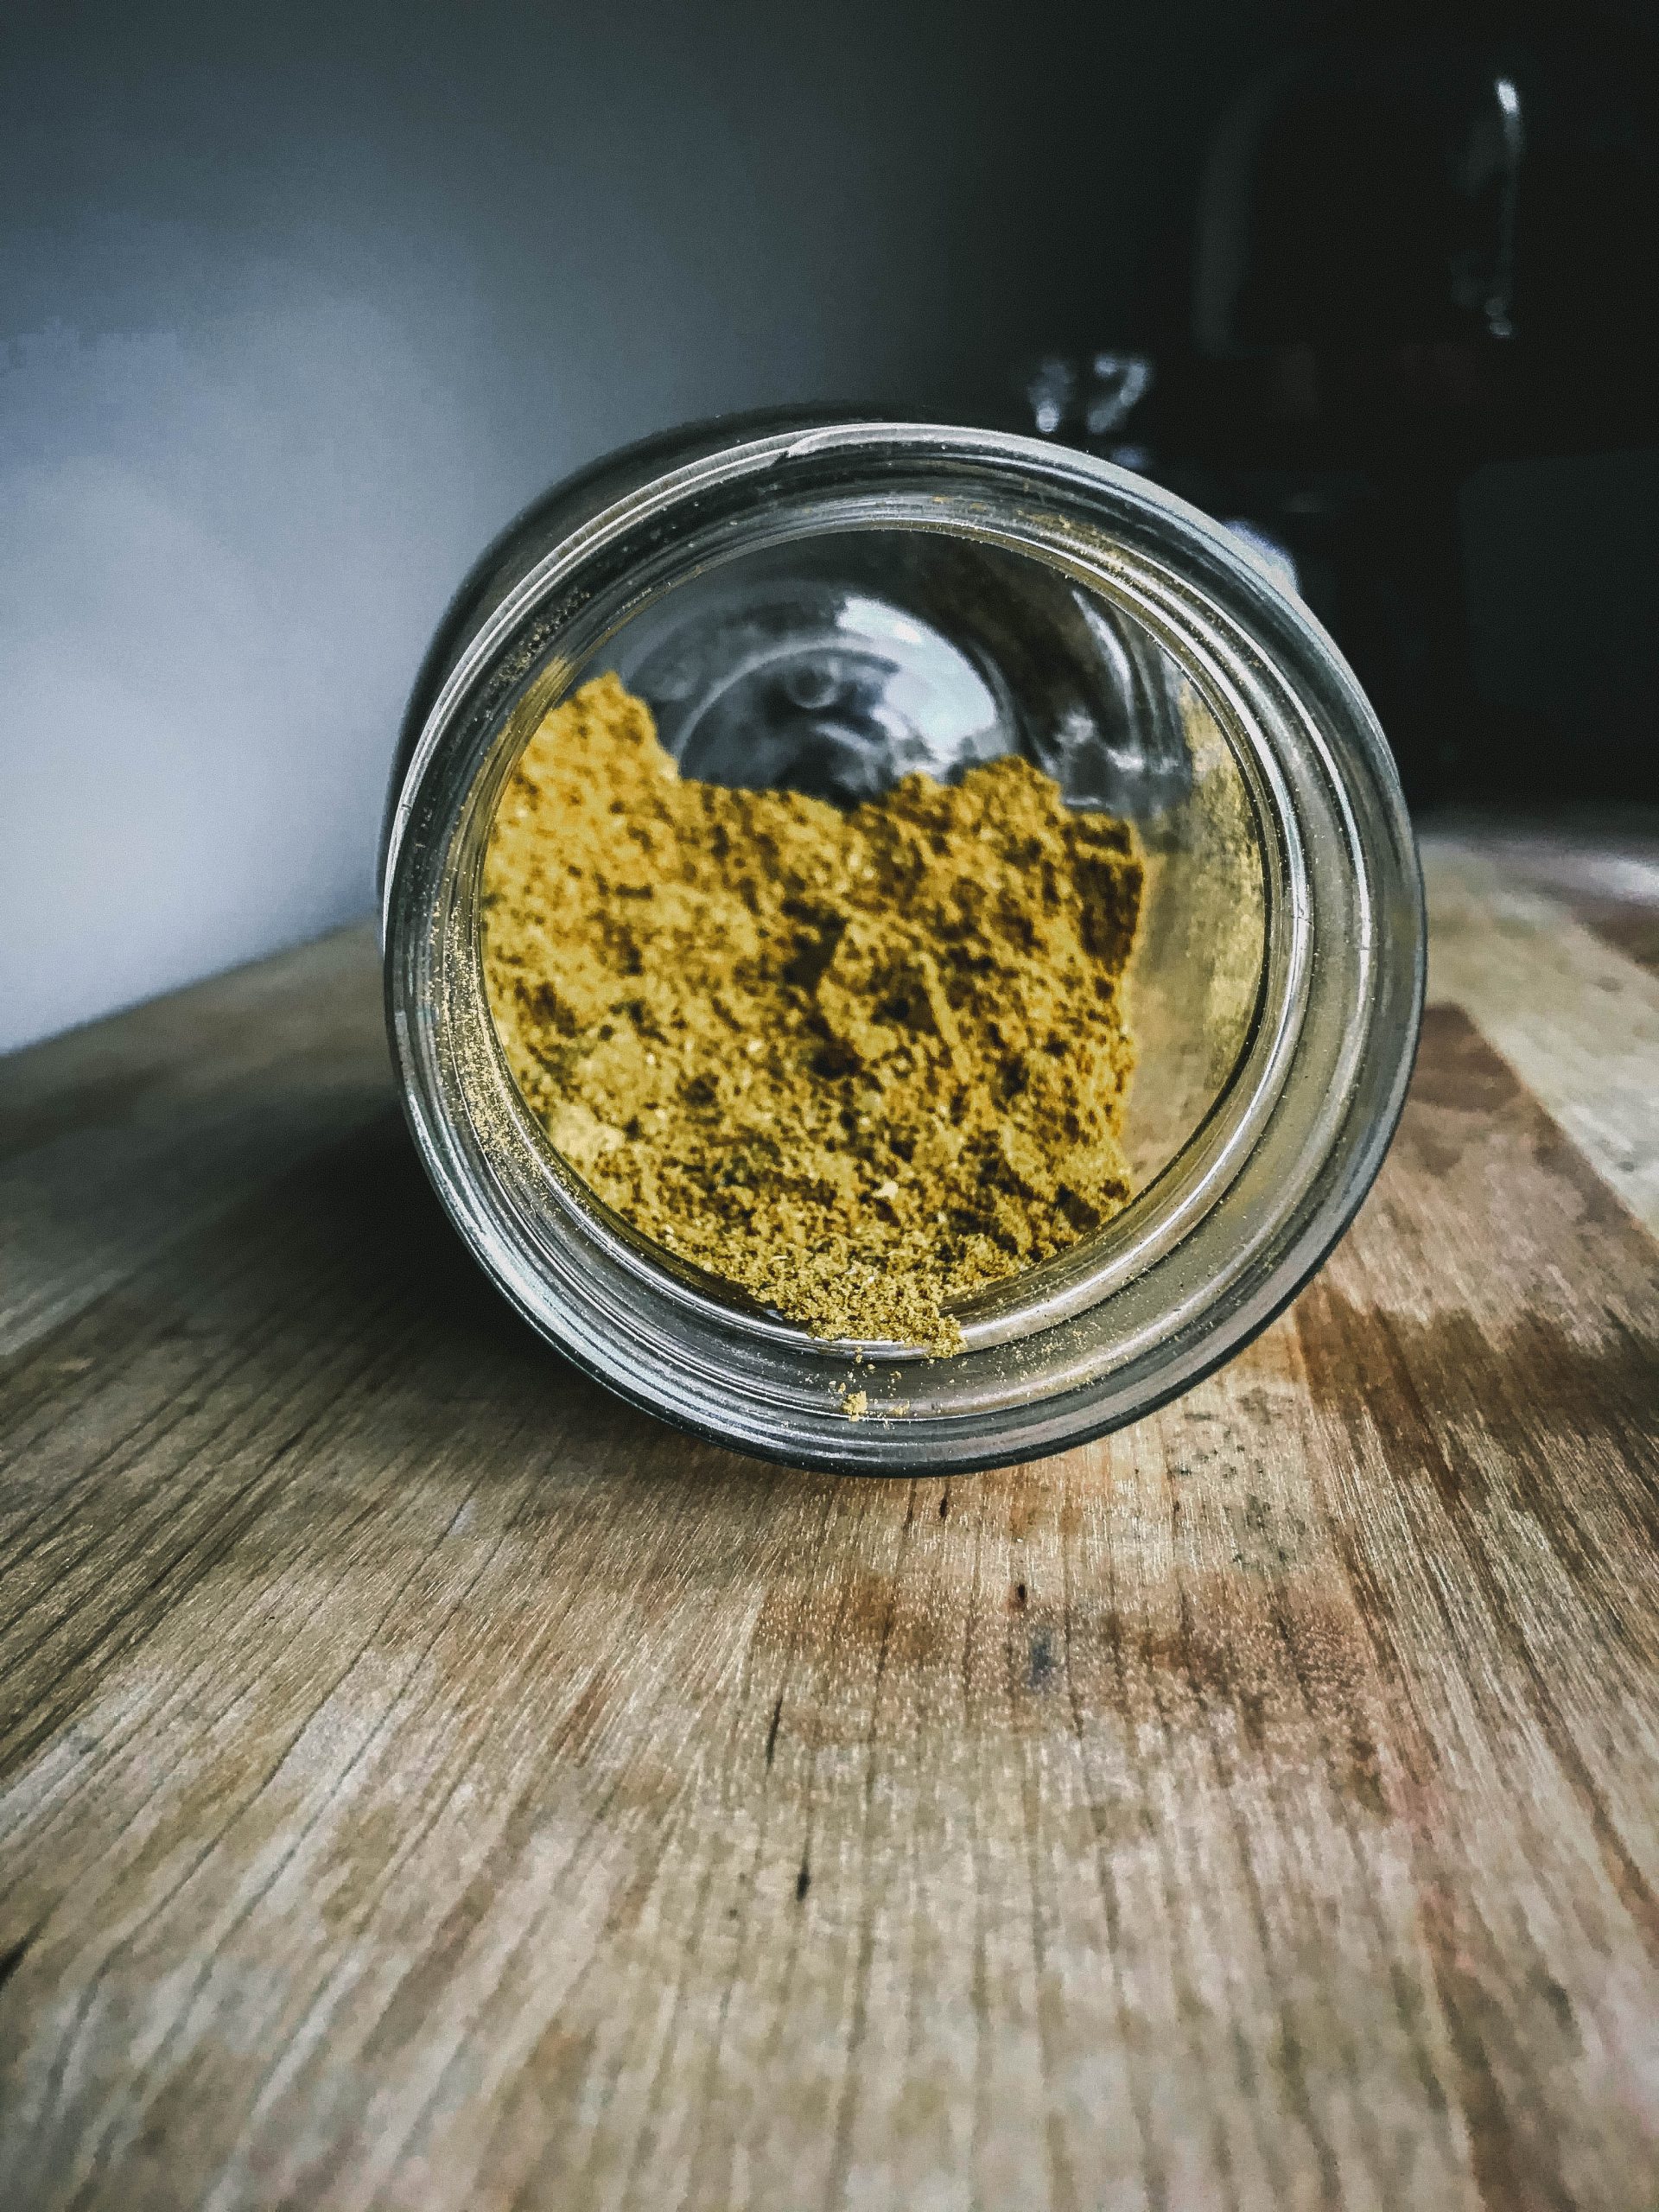 I love making my own spice mixes including this curry powder. You can use all pre-ground spices or buy whole and grind them yourself. I usually use a mixture of ground and whole depending on what I have on hand.